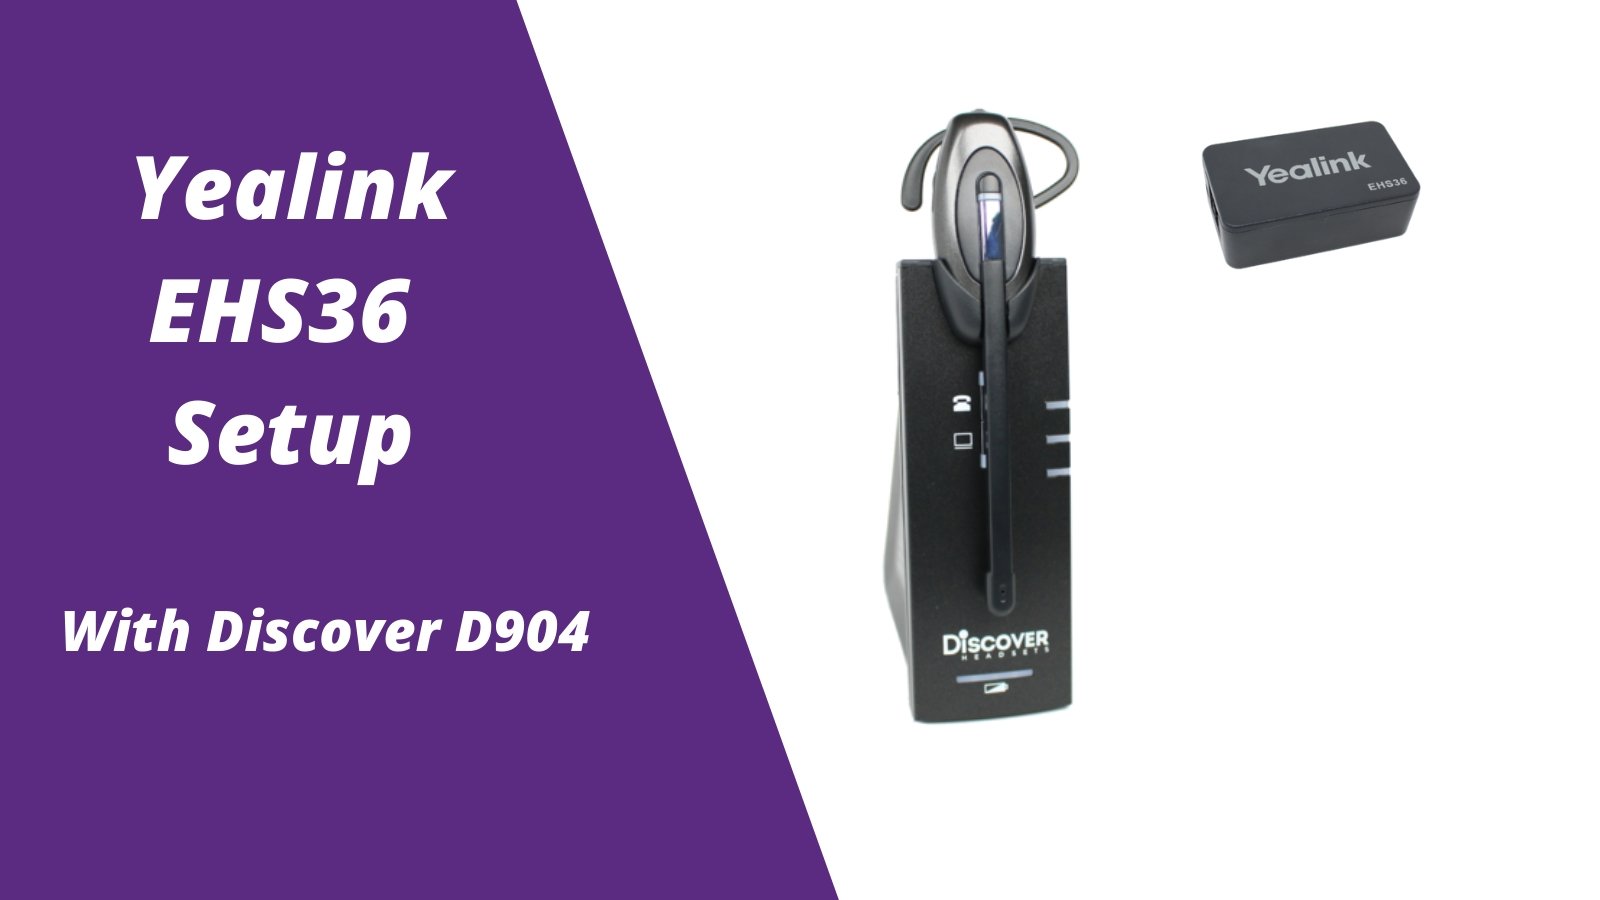 Yealink EHS36 Setup Guide For Discover D904 Wireless Office Headset - Headset Advisor